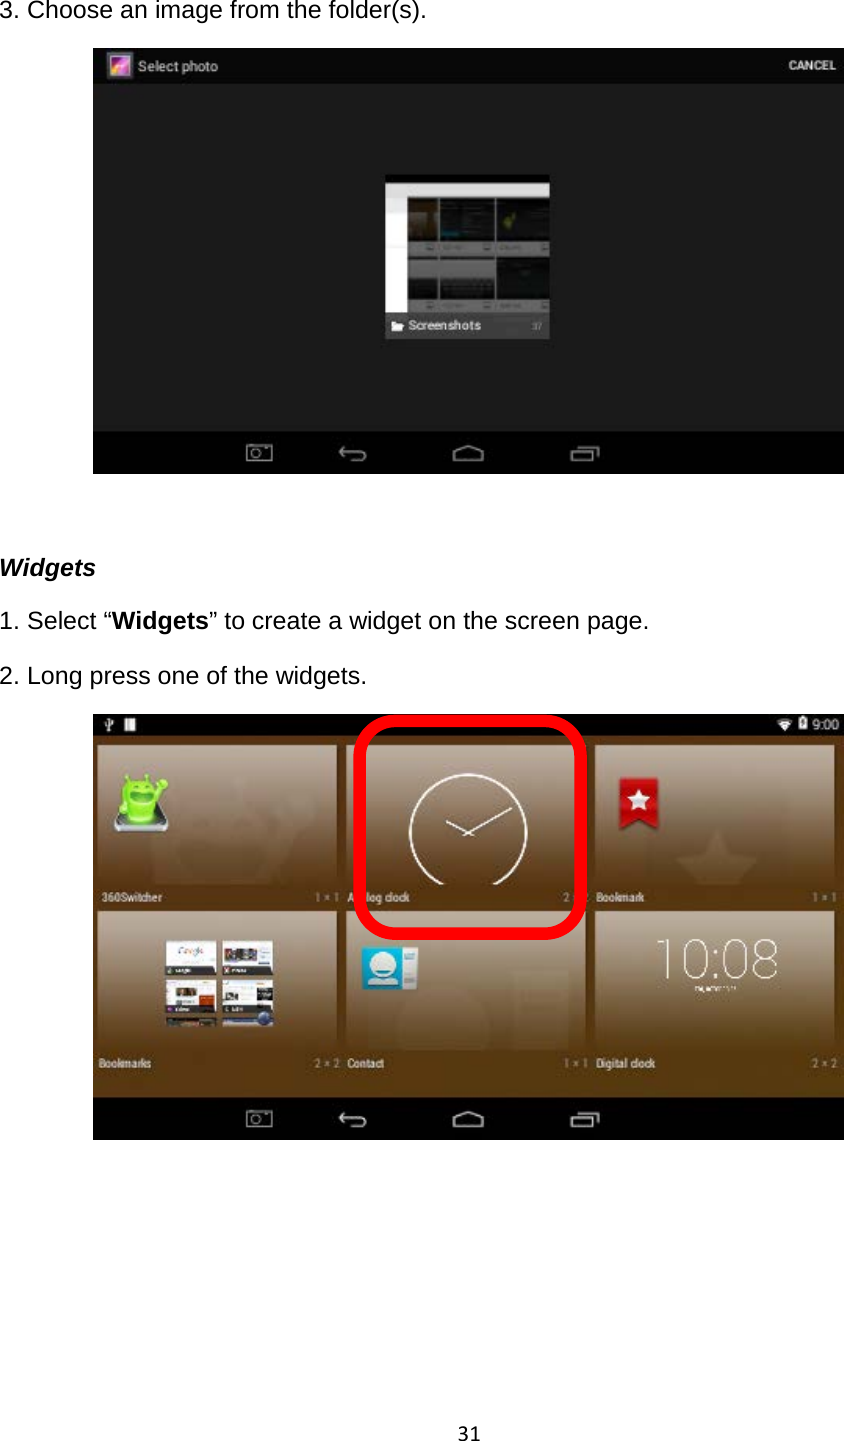 31  3. Choose an image from the folder(s).    Widgets 1. Select “Widgets” to create a widget on the screen page.  2. Long press one of the widgets.        